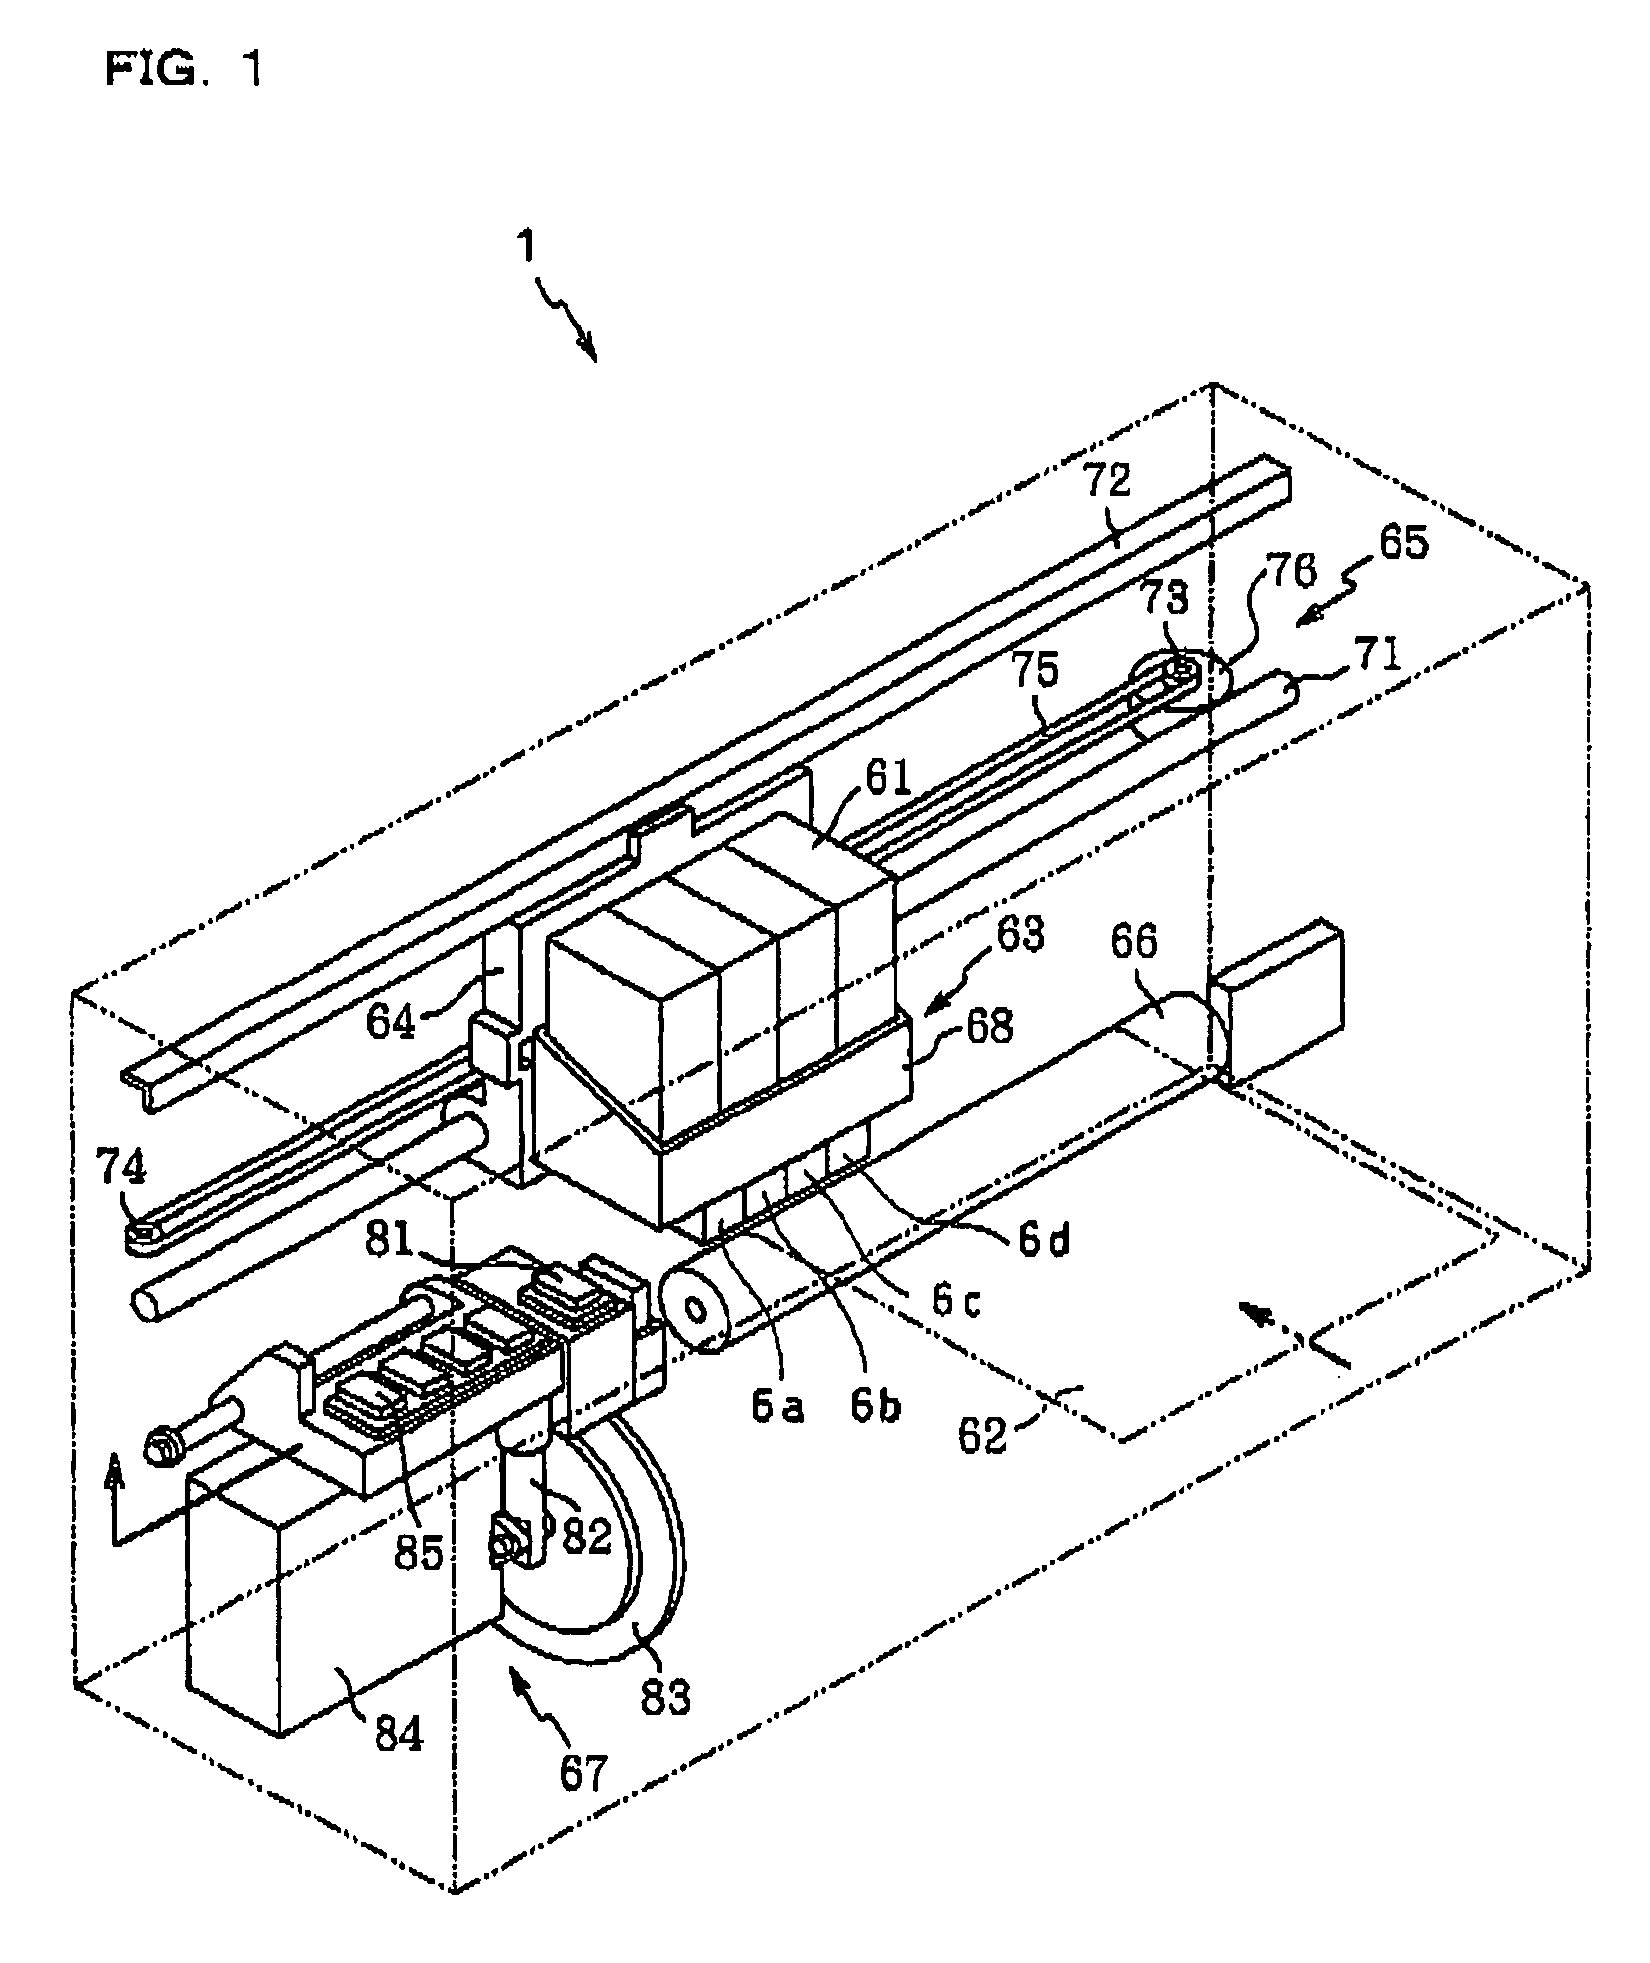 Apparatus for ejecting droplets, actuator controller used in the apparatus, and method for controlling the actuator